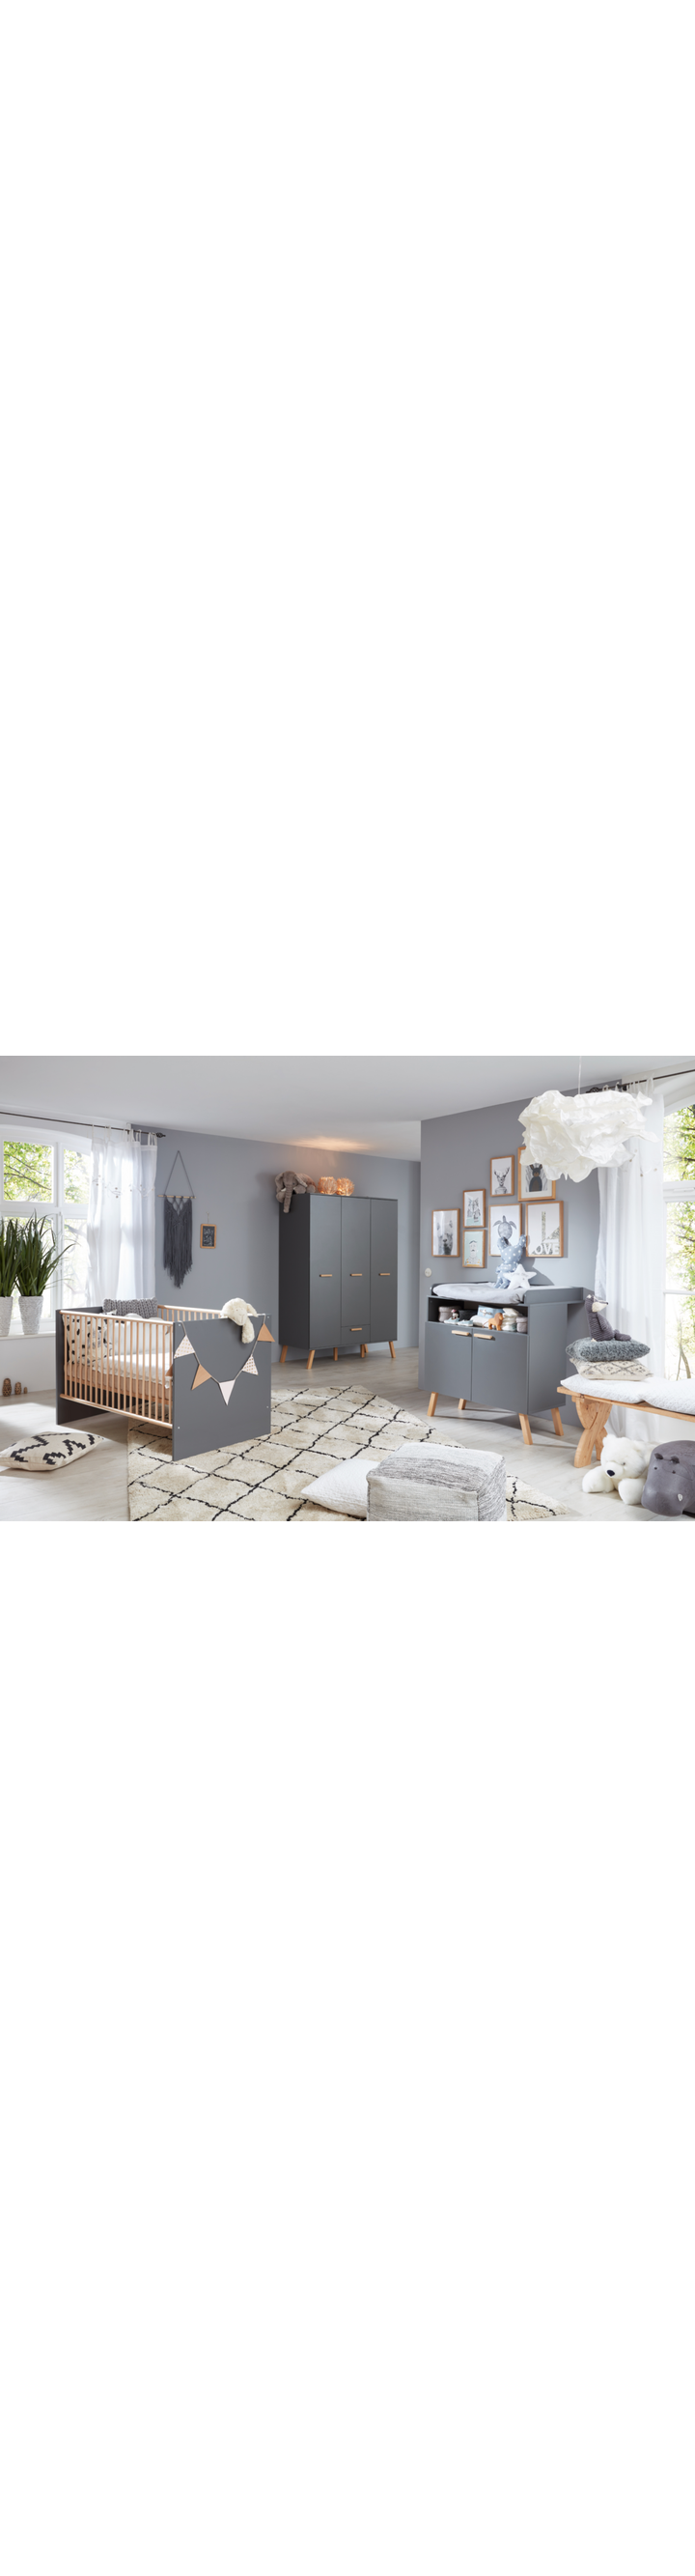 MX-AT-LP-Babyzimmer-KW25-Anik2.png